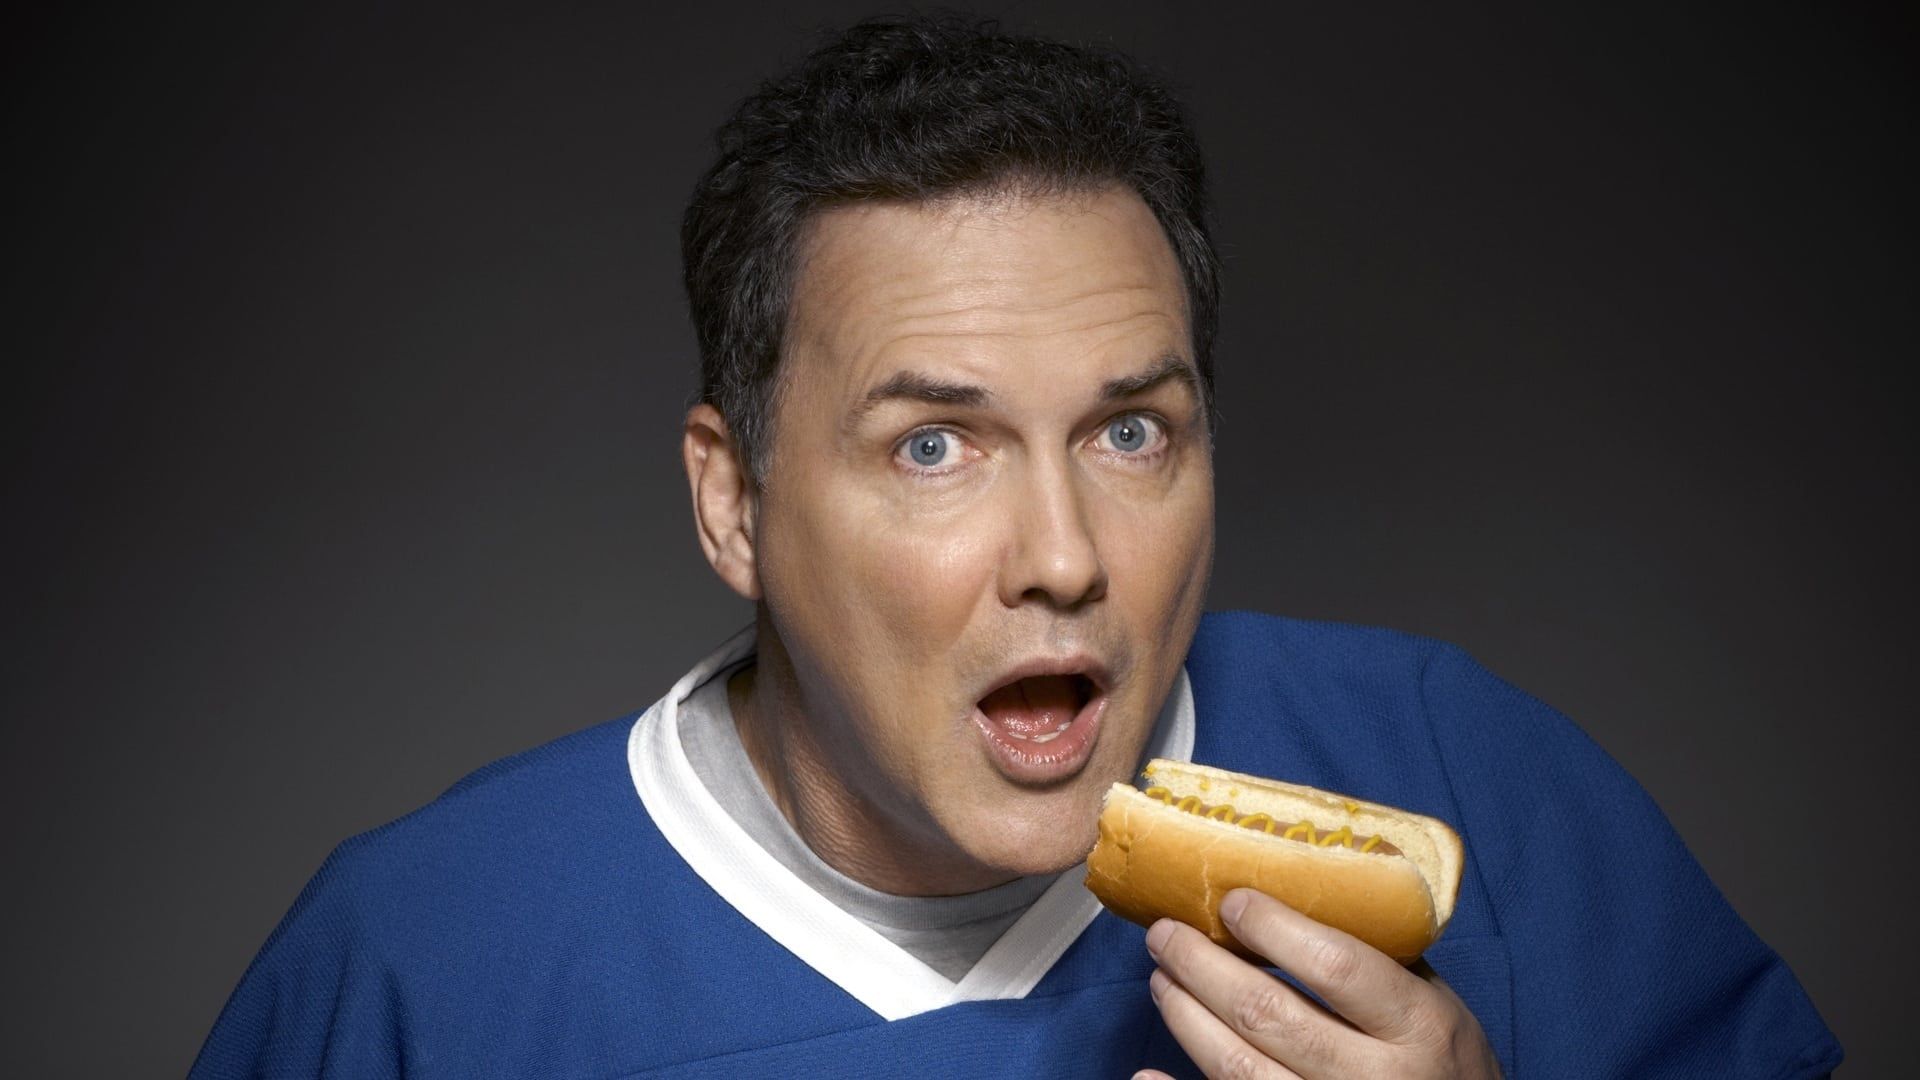 Sports Show with Norm Macdonald background